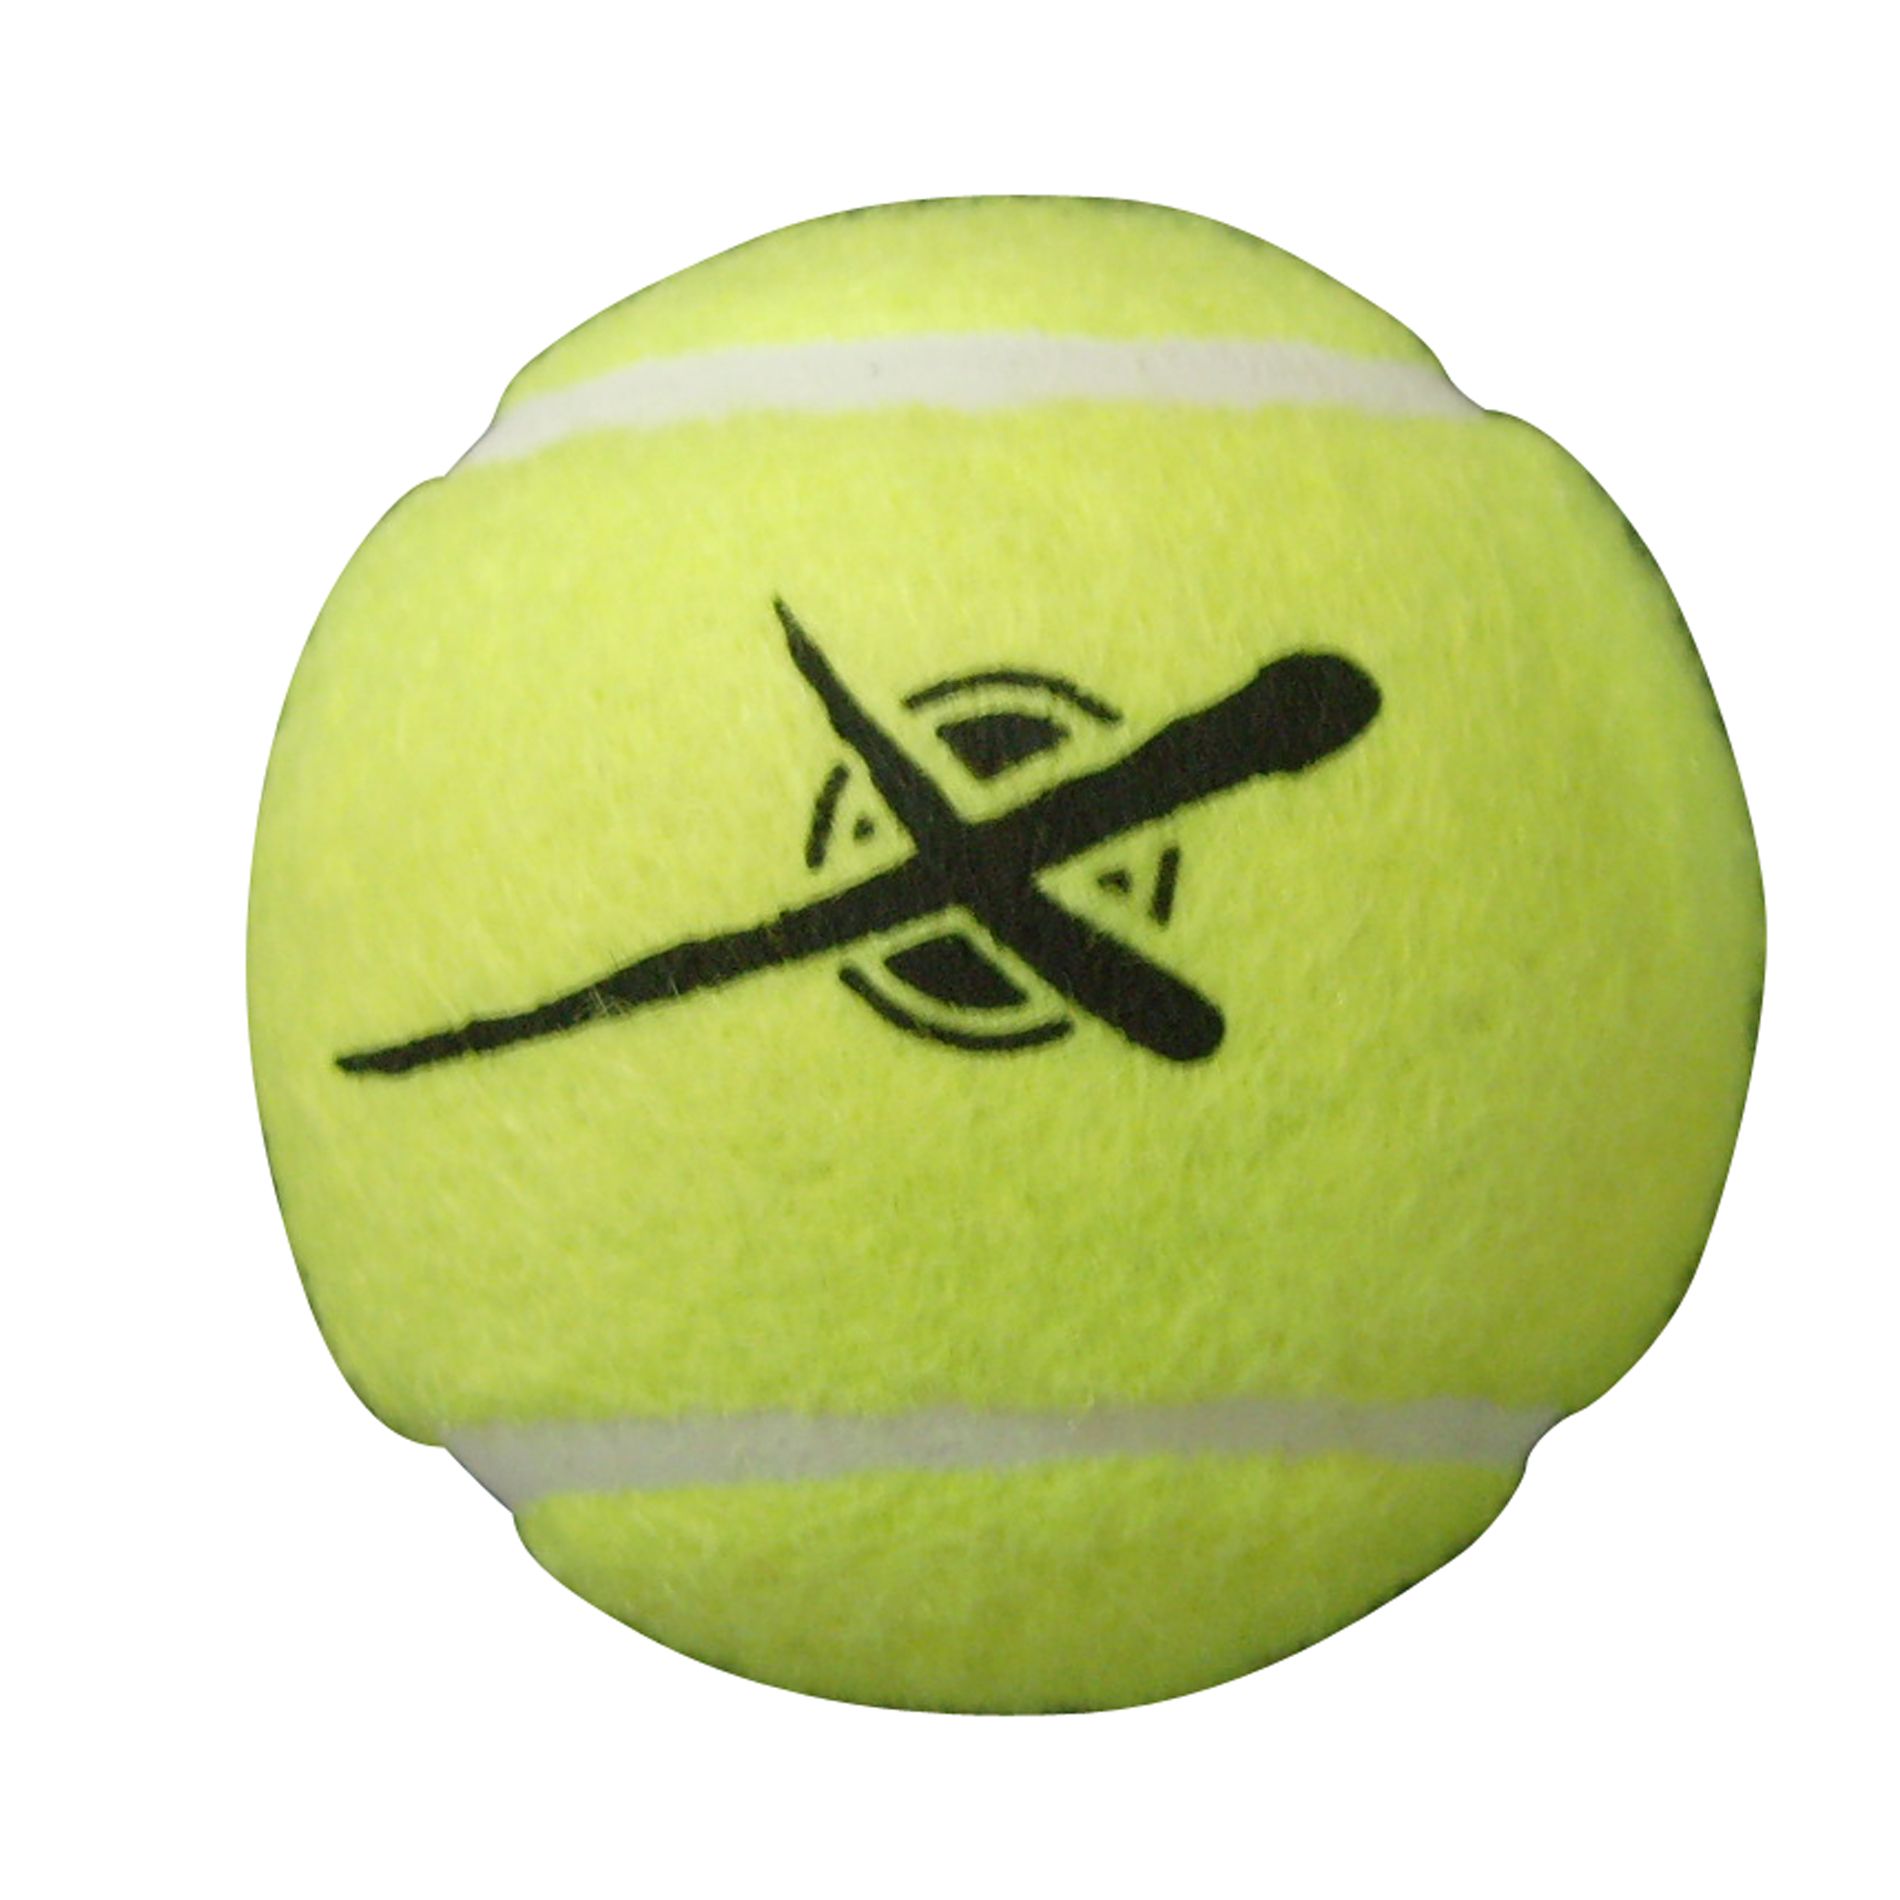 Xtreme Sports Tennis Balls and Bag - 20 pack